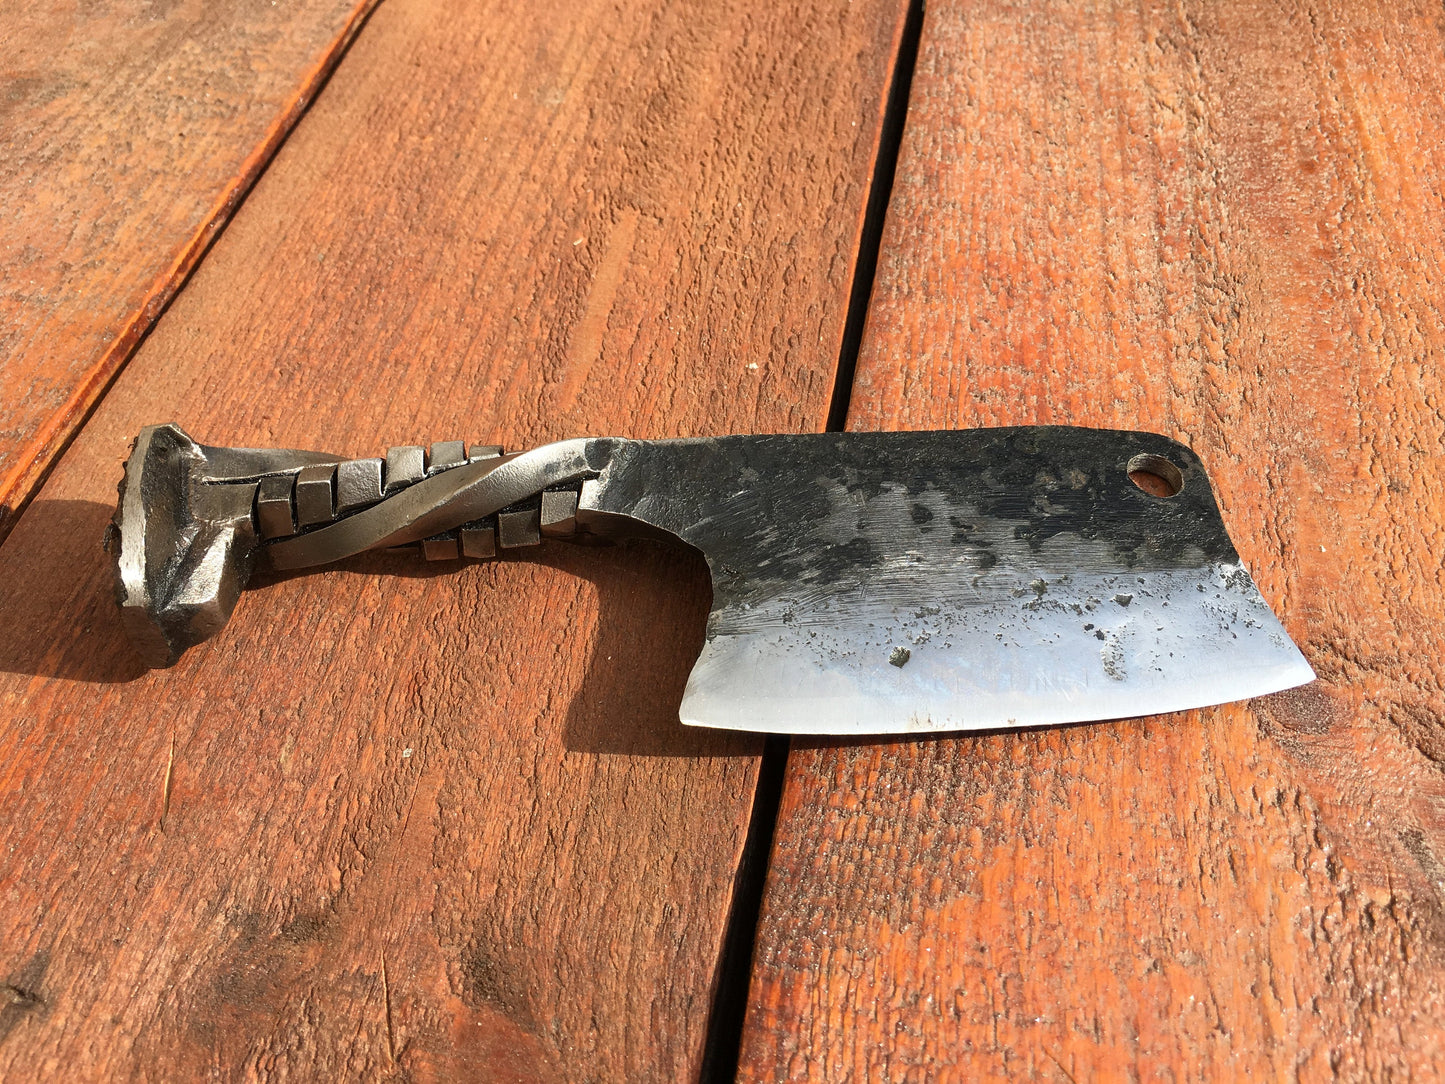 6th anniversary gift for him, iron anniversary gift for him, 11th anniversary gift for him, wedding anniversary gift, railroad spike knife